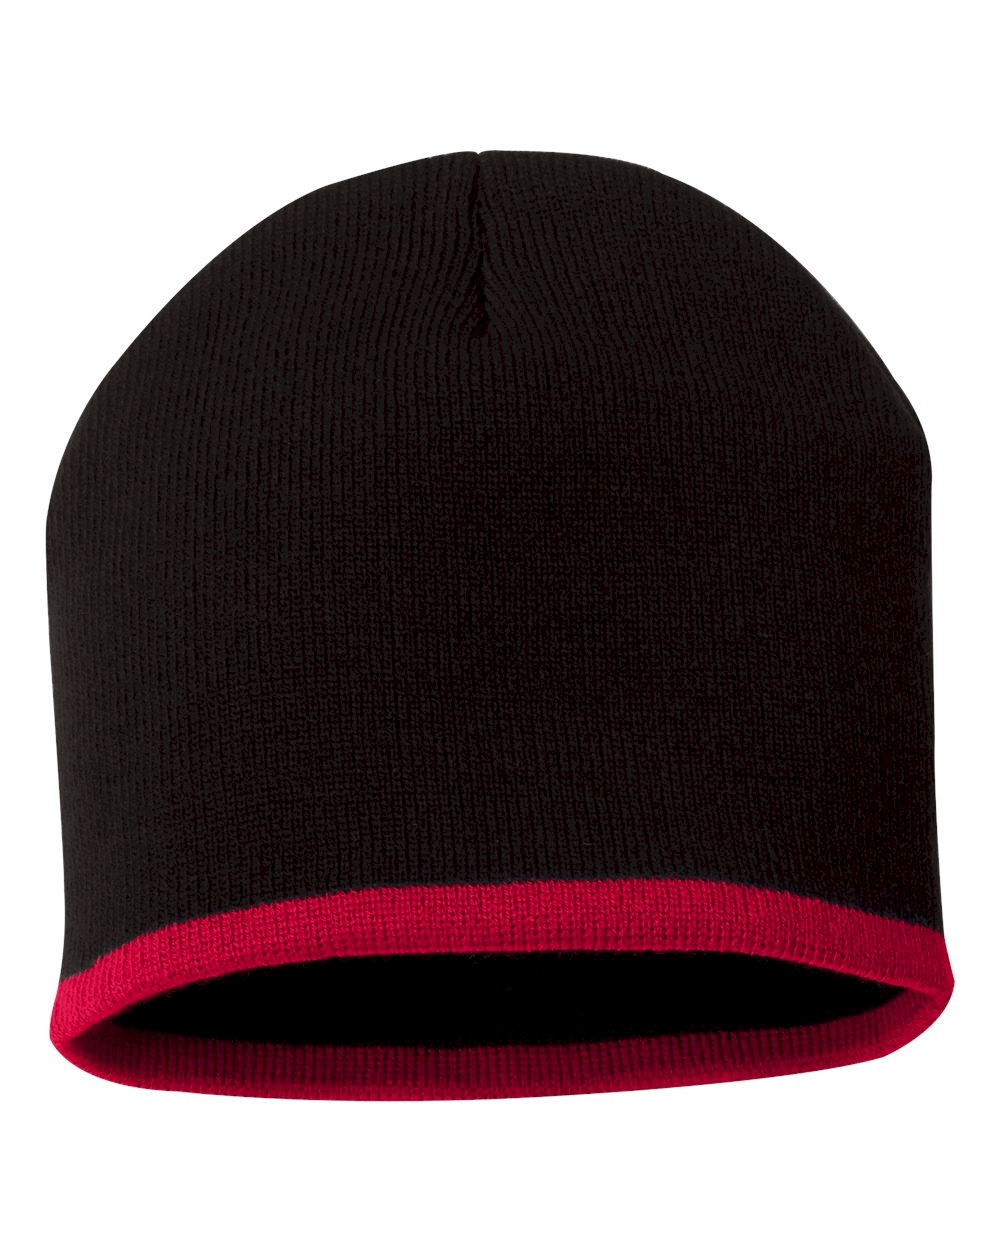 8" Knit Beanie with Striped Bottom Embroidery Blanks - BLACK/RED